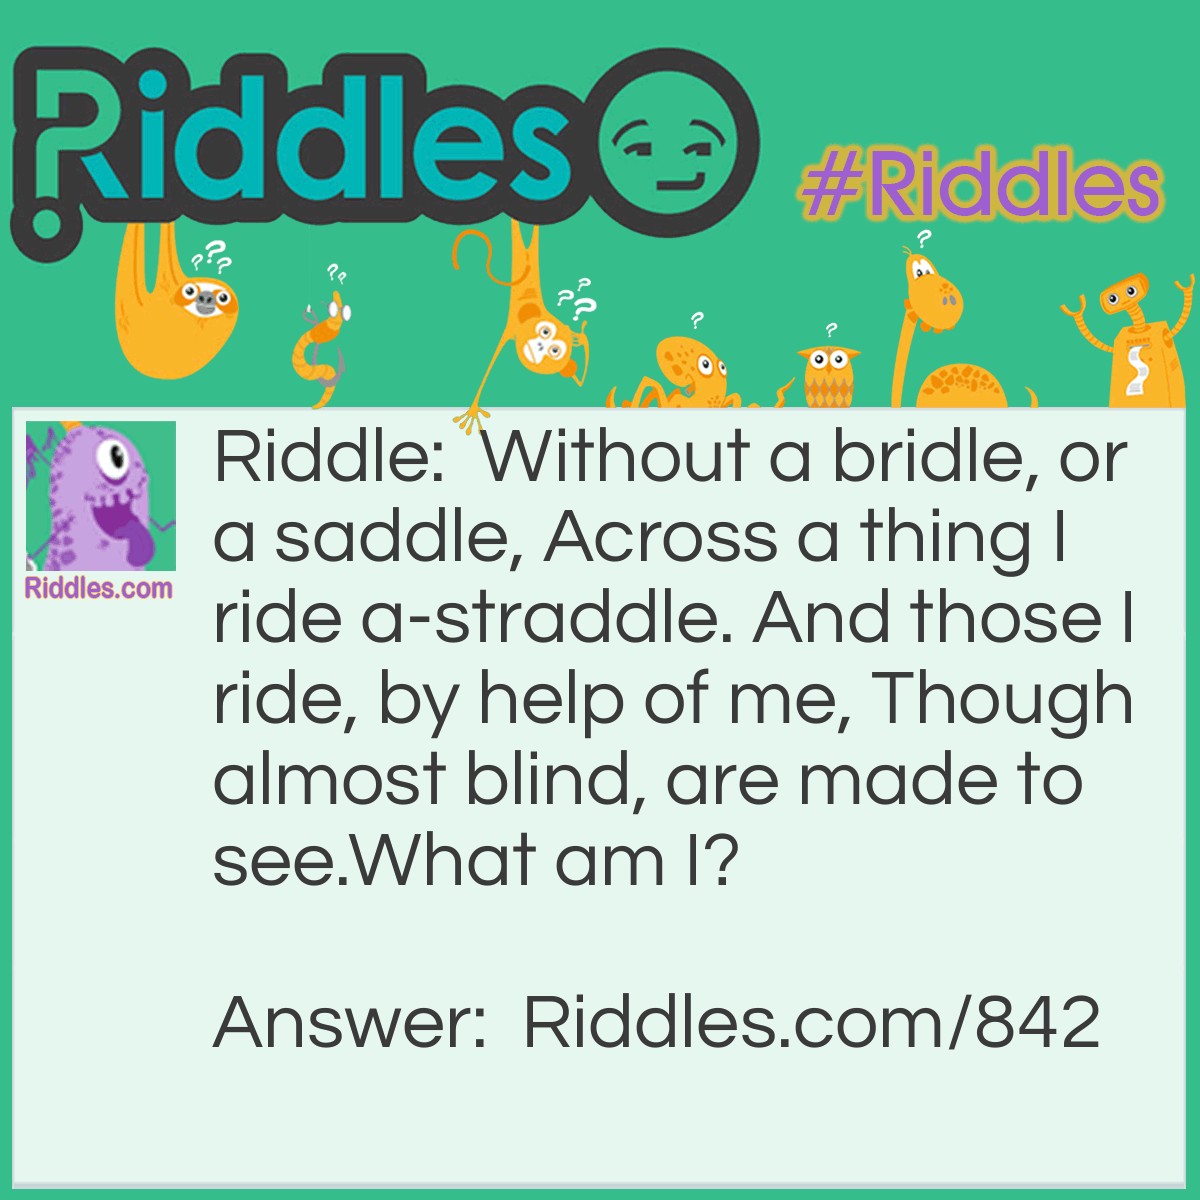 Riddle: Without a bridle, or a saddle, Across a thing I ride a-straddle. And those I ride, by help of me, Though almost blind, are made to see.
What am I? Answer: Glasses.